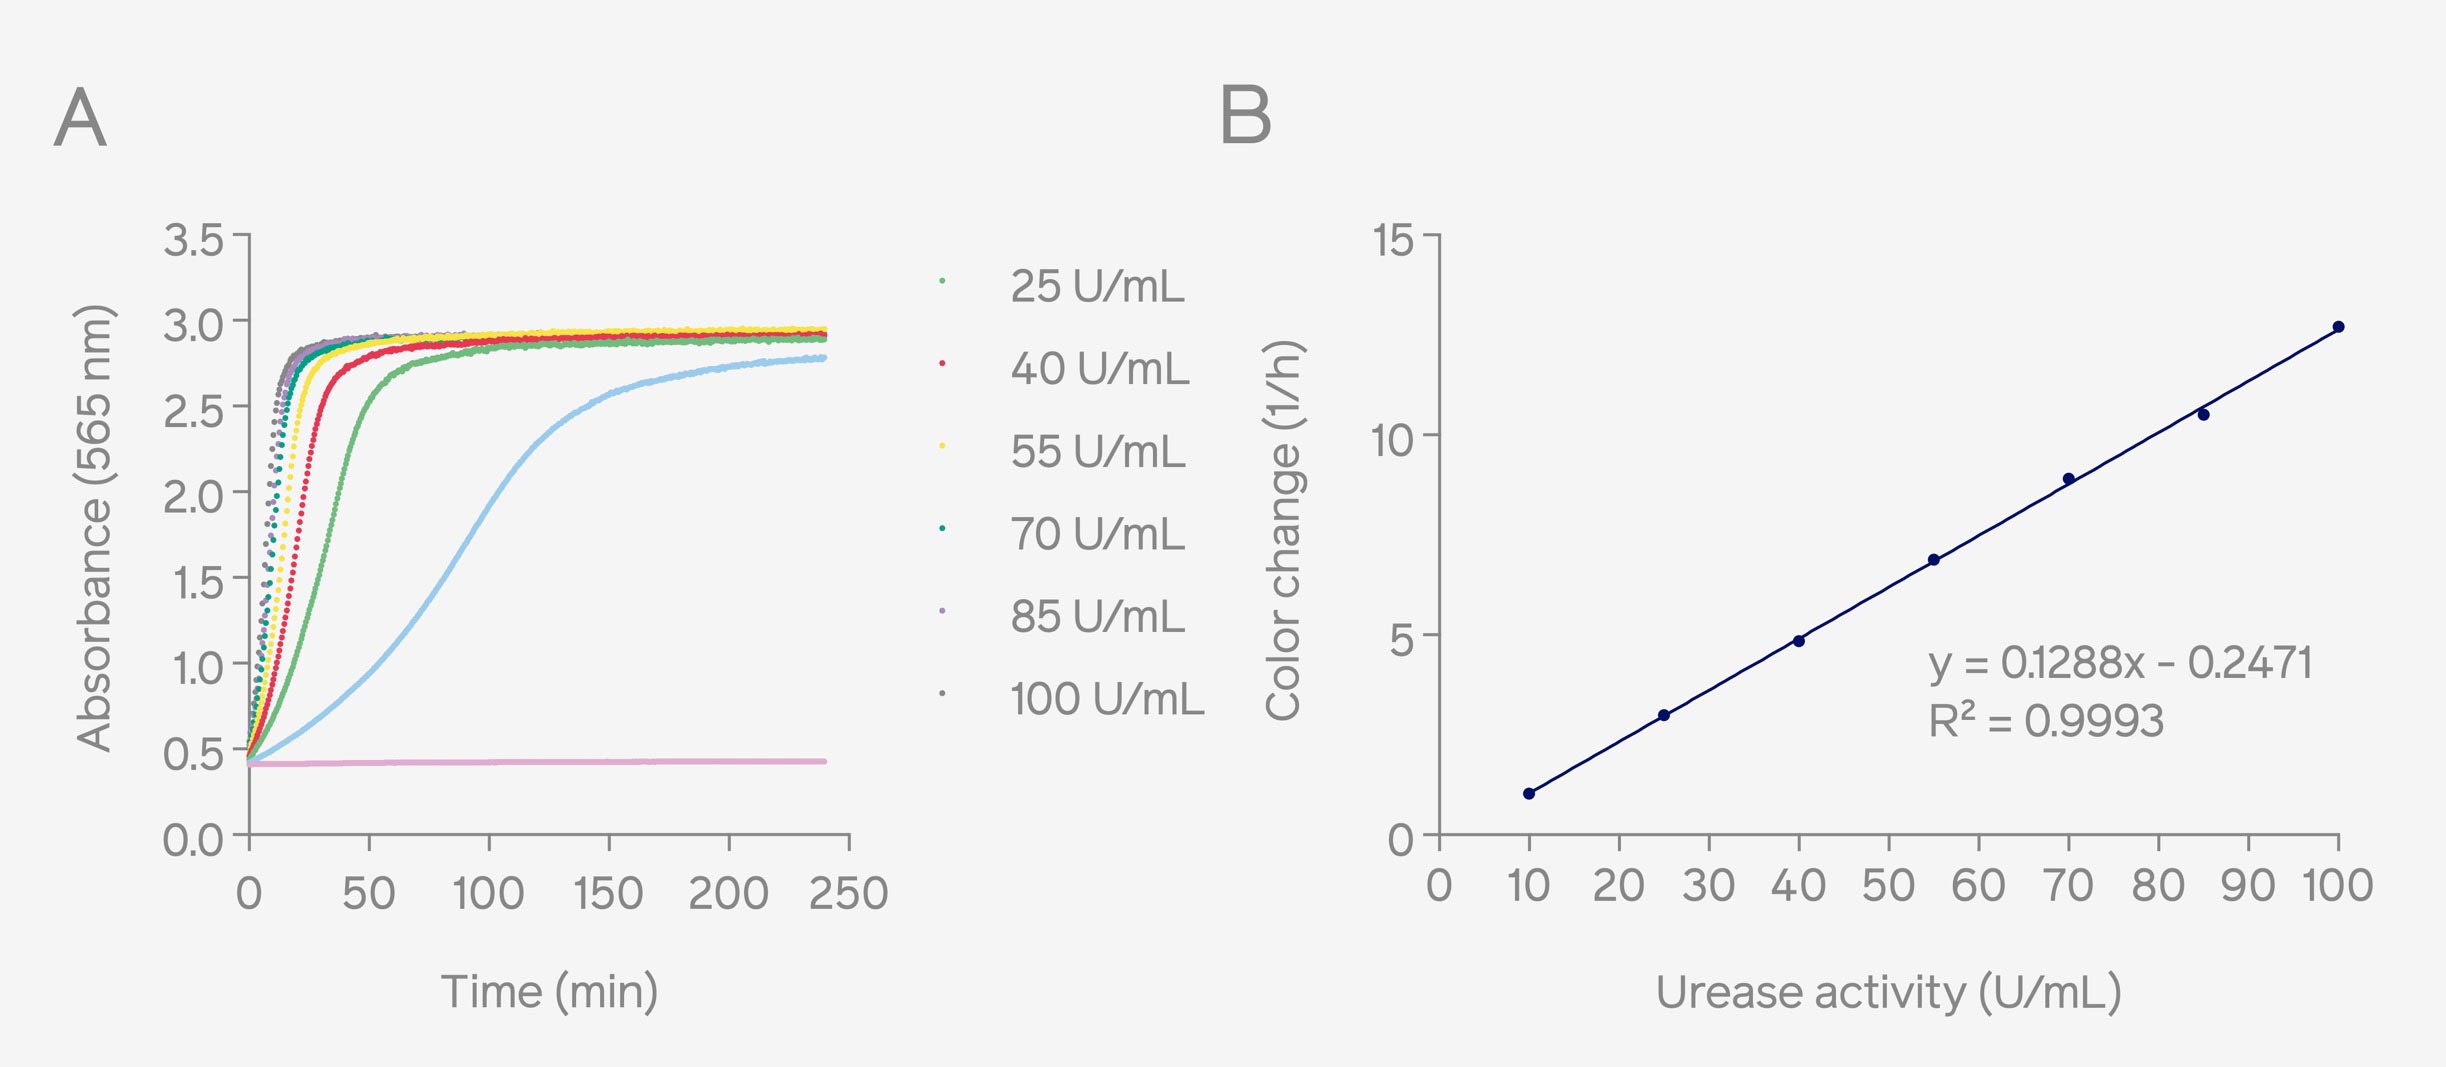 Figure 1: Absorbance curves of urease activity (U/mL) in Stuart’s broth measured at 562 nm by Absorbance 96 (A). Corresponding standard curve based on the color change rates and urease activities (10 – 100 U/mL), the color change rate was calculated by determining the maximum slope of the sigmoidal curve (B). Urease Activity: Kinetic Evaluation with Absorbance 96 Microplate Reader Byonoy